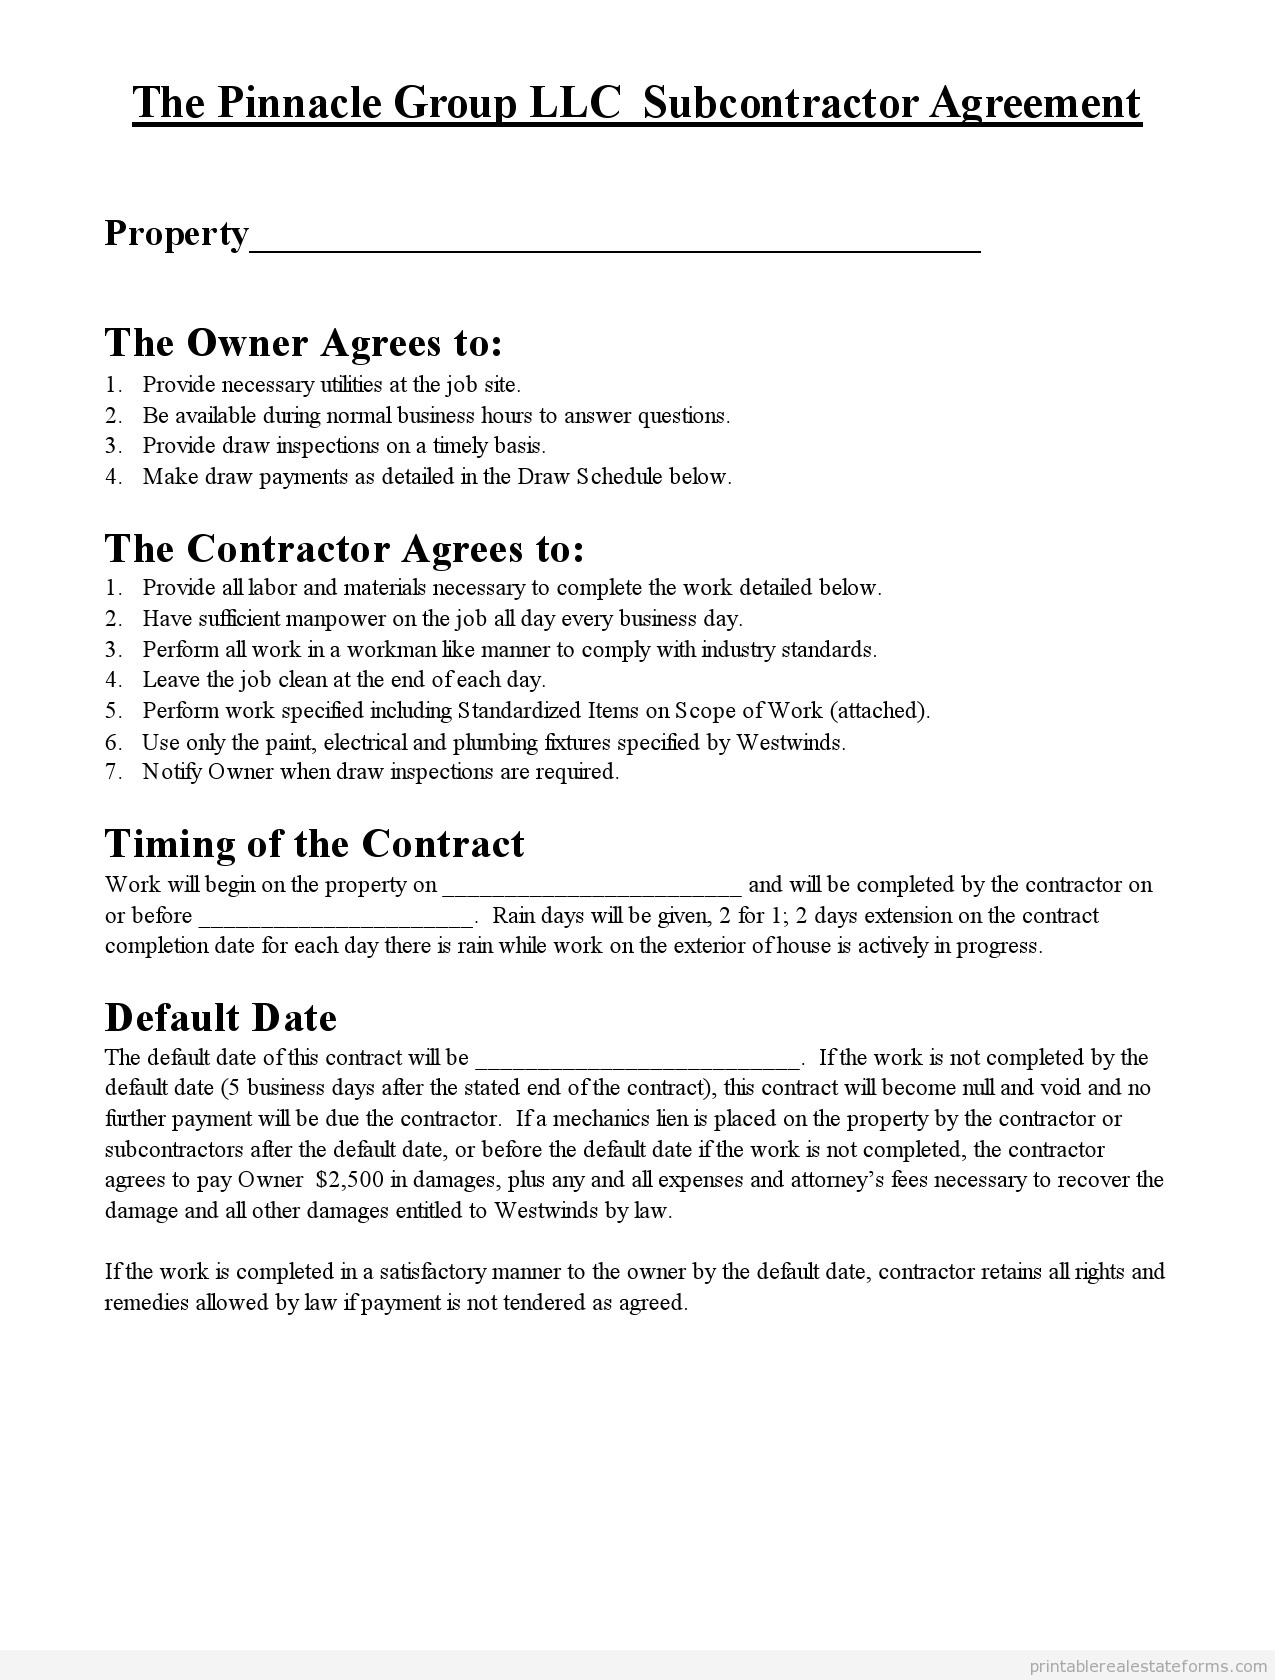 Free Printable subcontractor agreement Form